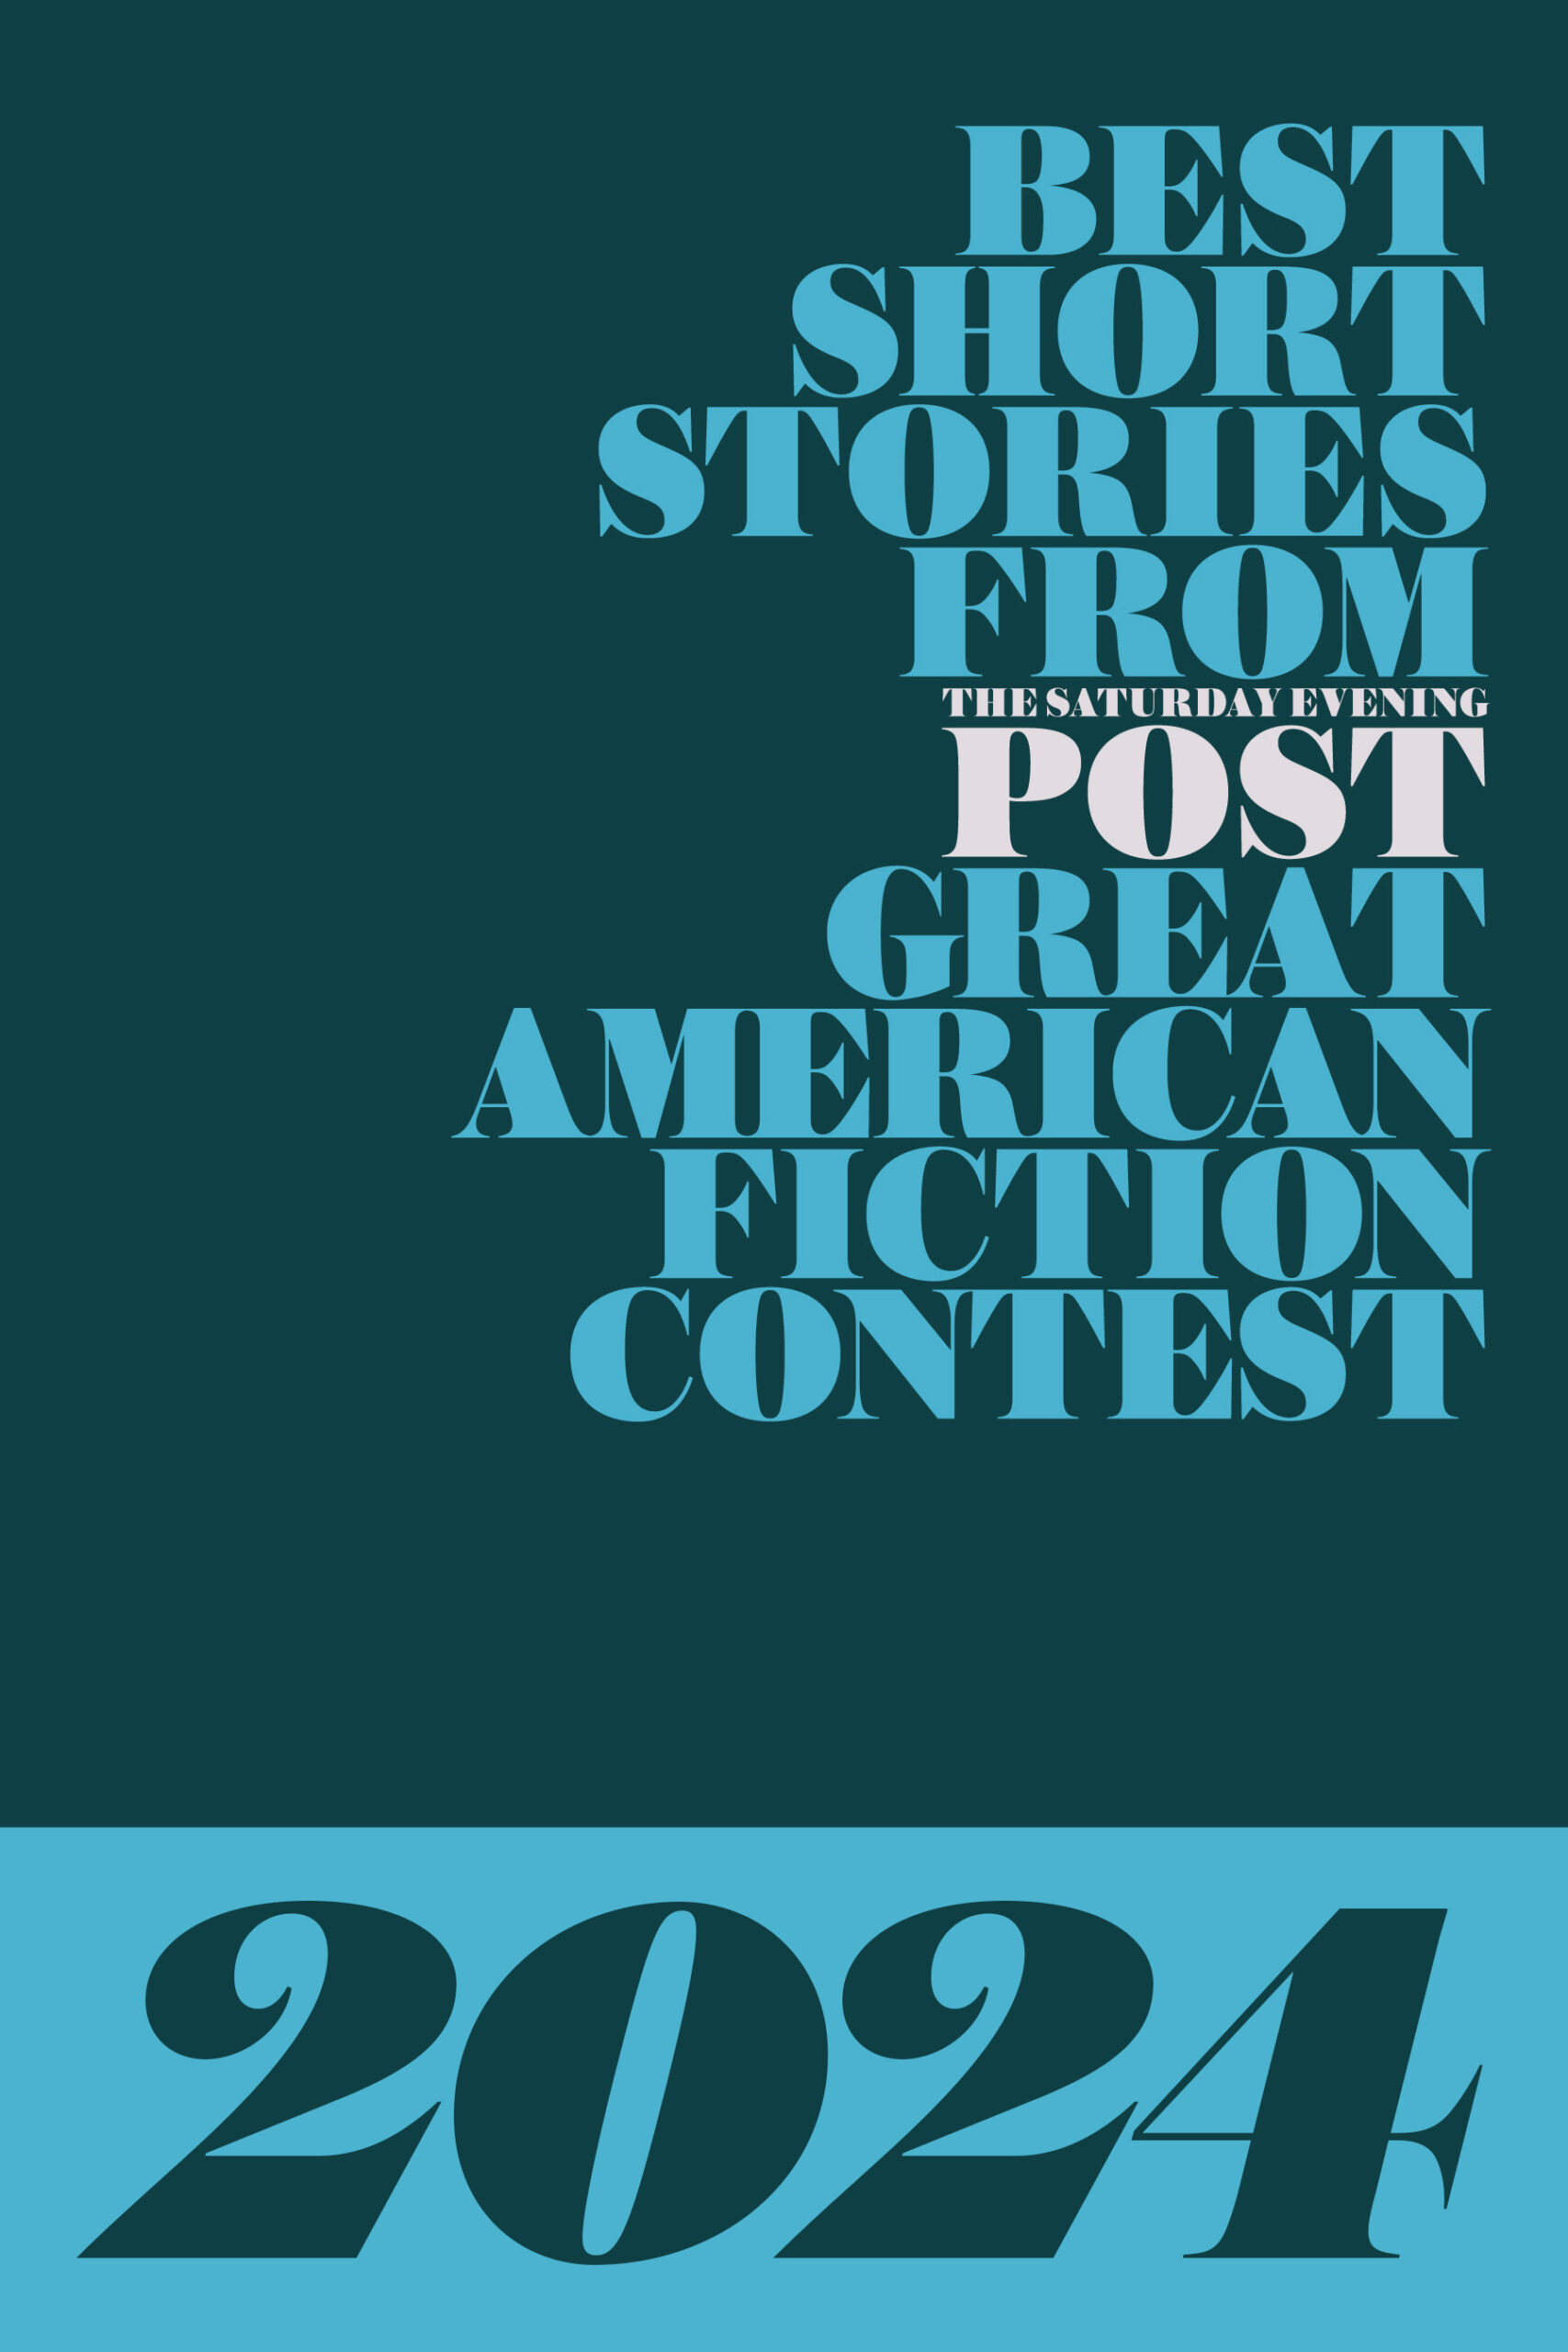 Best Stories from The Saturday Evening Post Great American Fiction Contest 2024